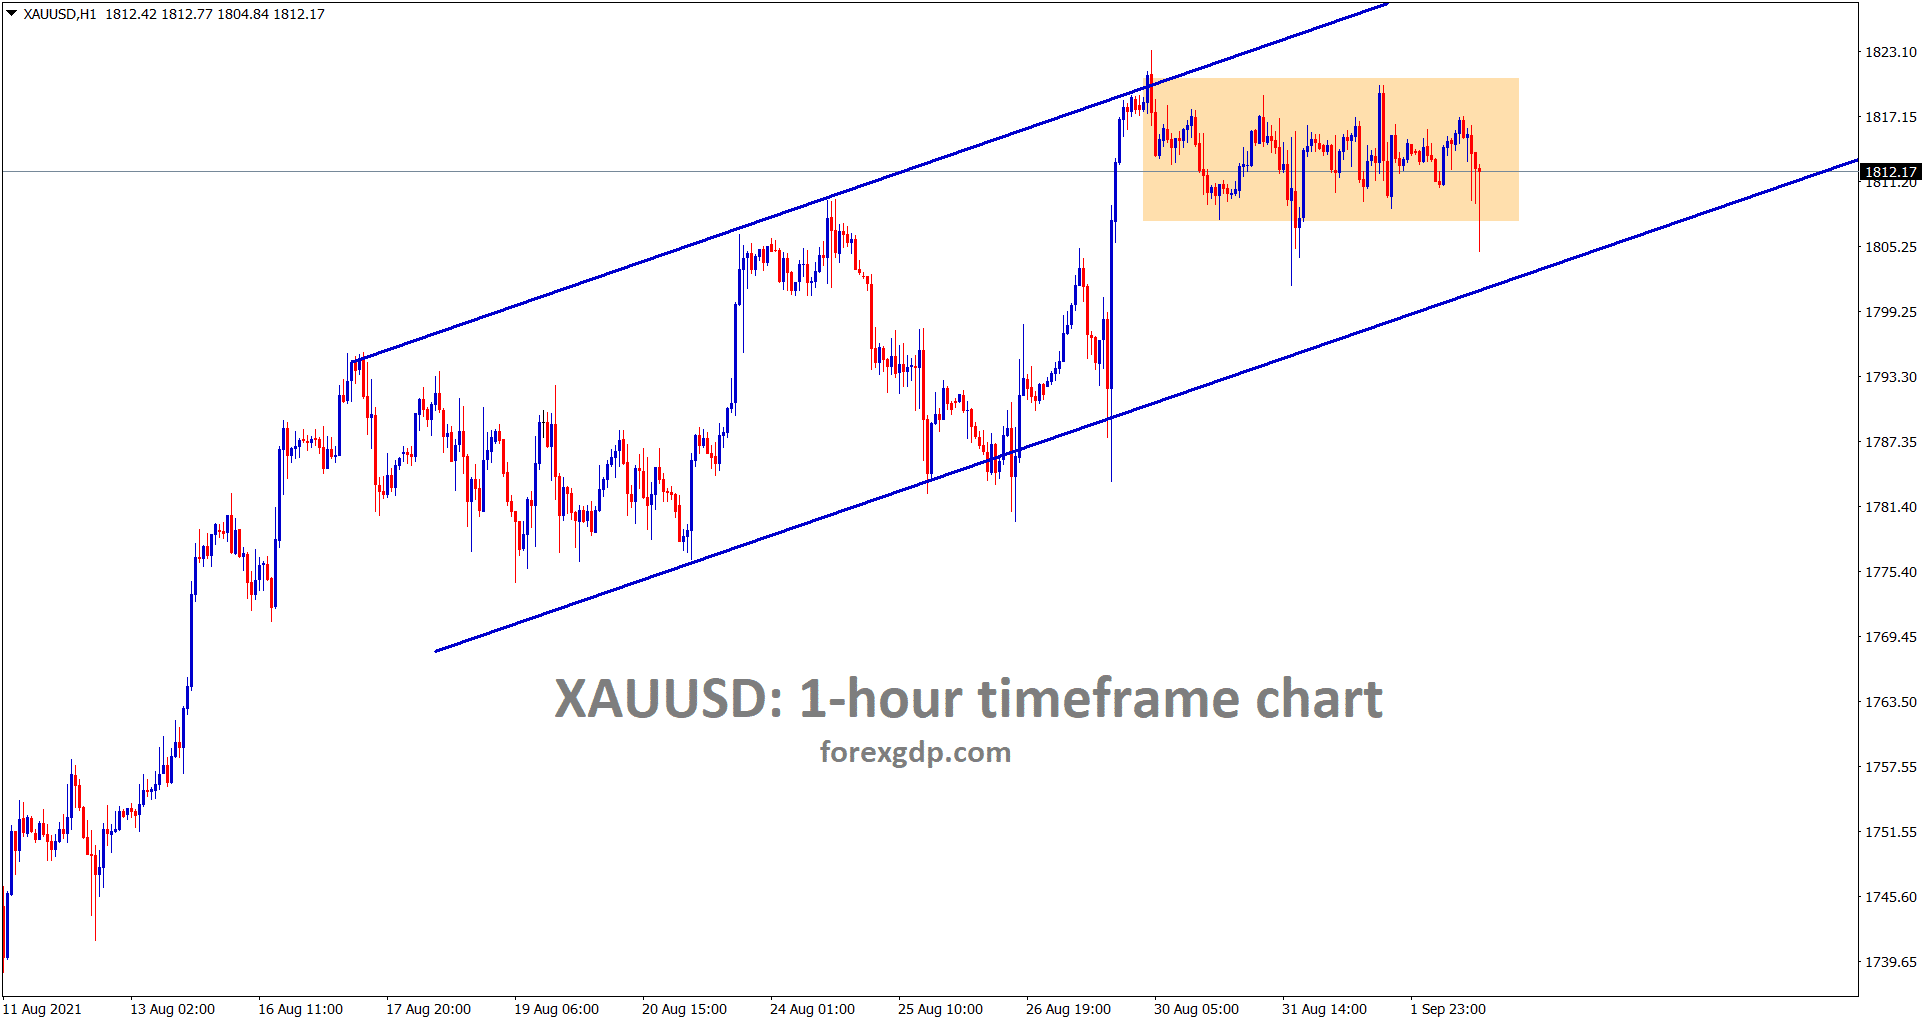 Gold is consolidating strongly in a minor ascending channel range wait for this channel breakout